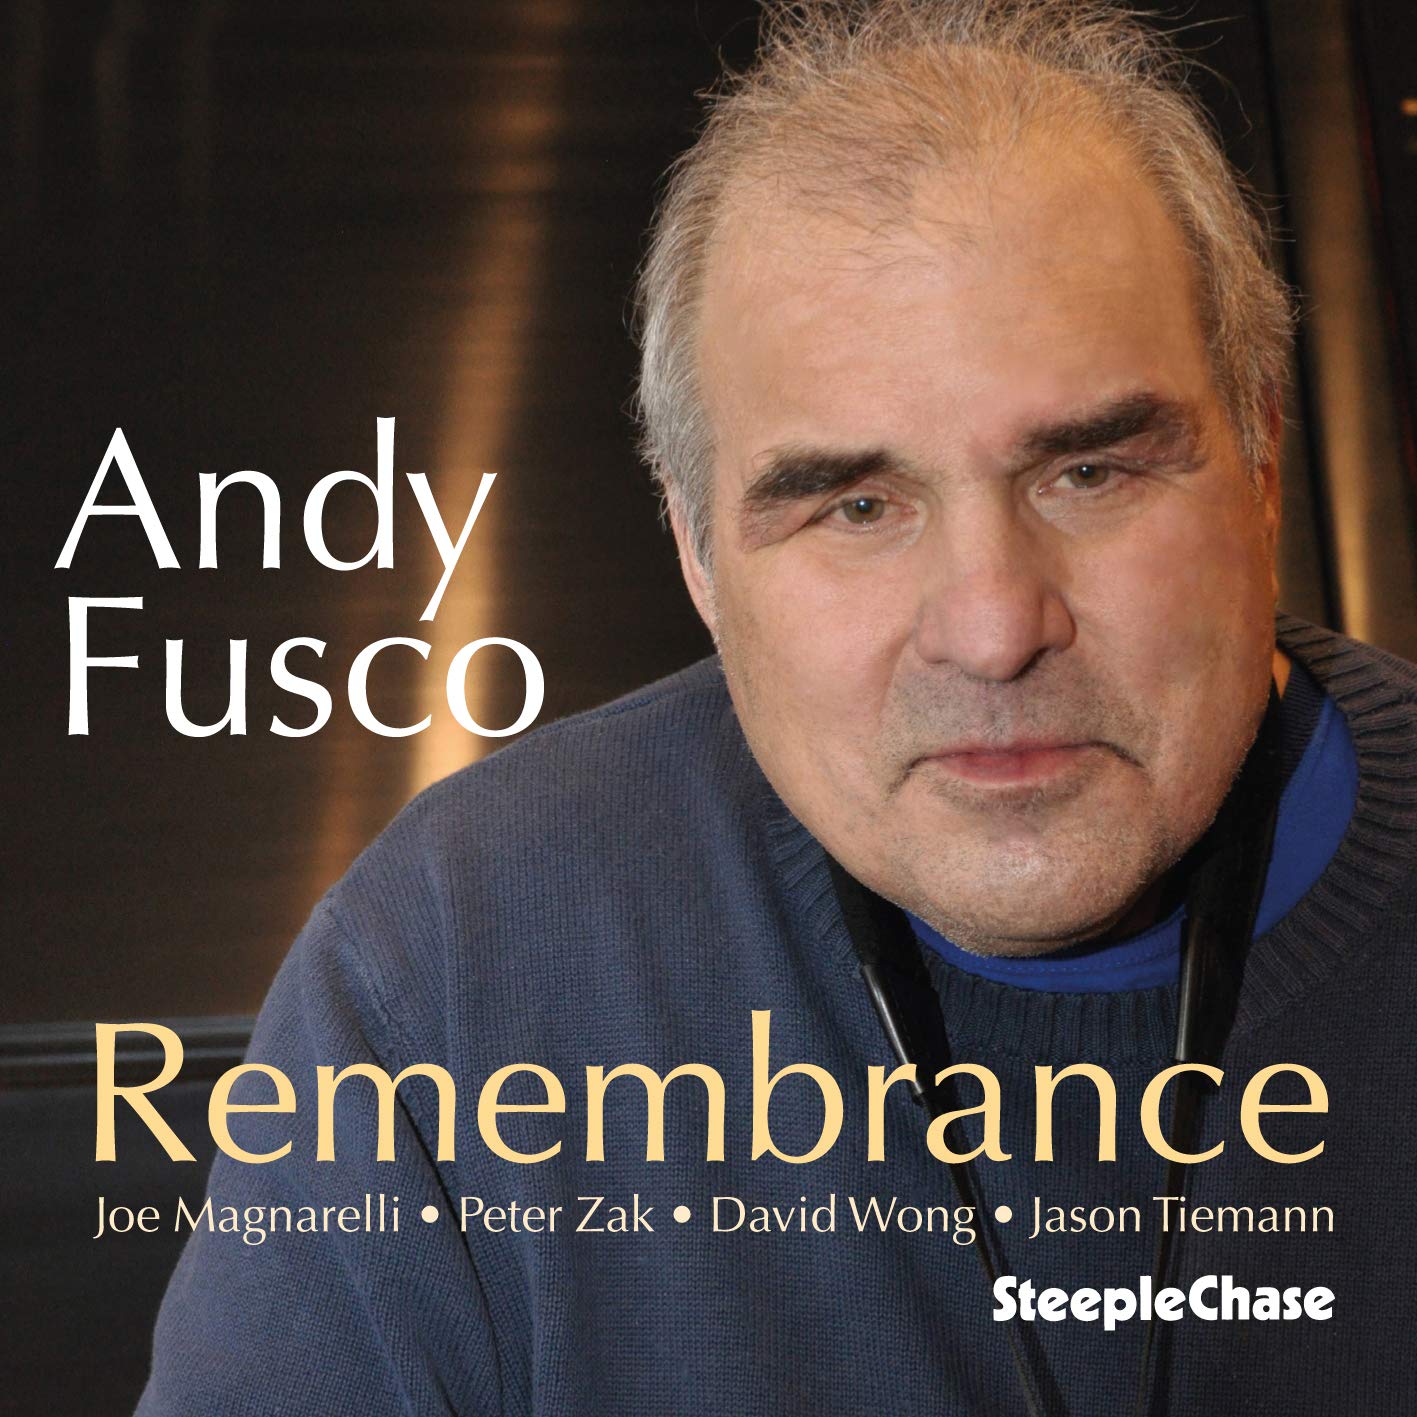 ANDY FUSCO - Remembrance cover 